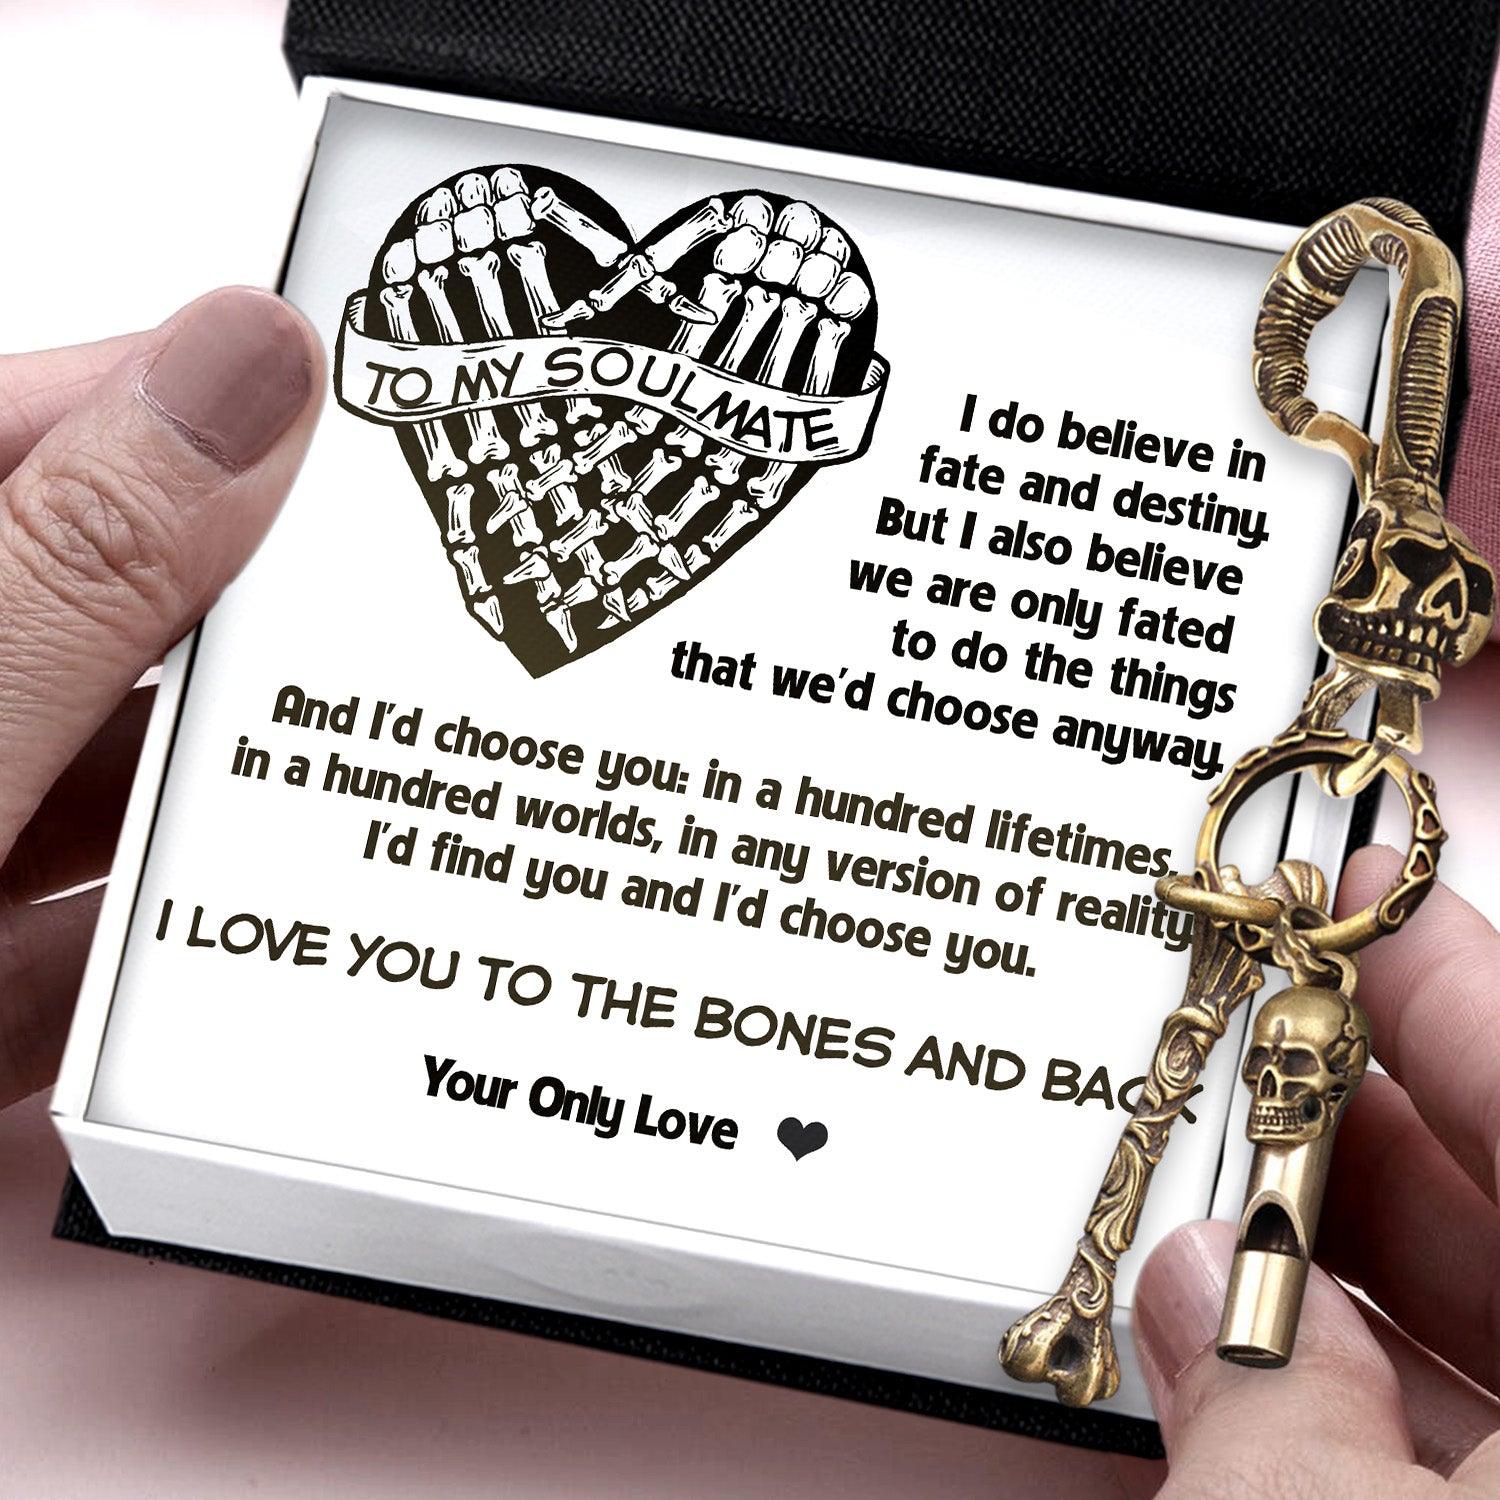 Skull Keychain Holder - Skull - To My Soulmate - I Love You To The Bones And Back - Augkci26014 - Gifts Holder